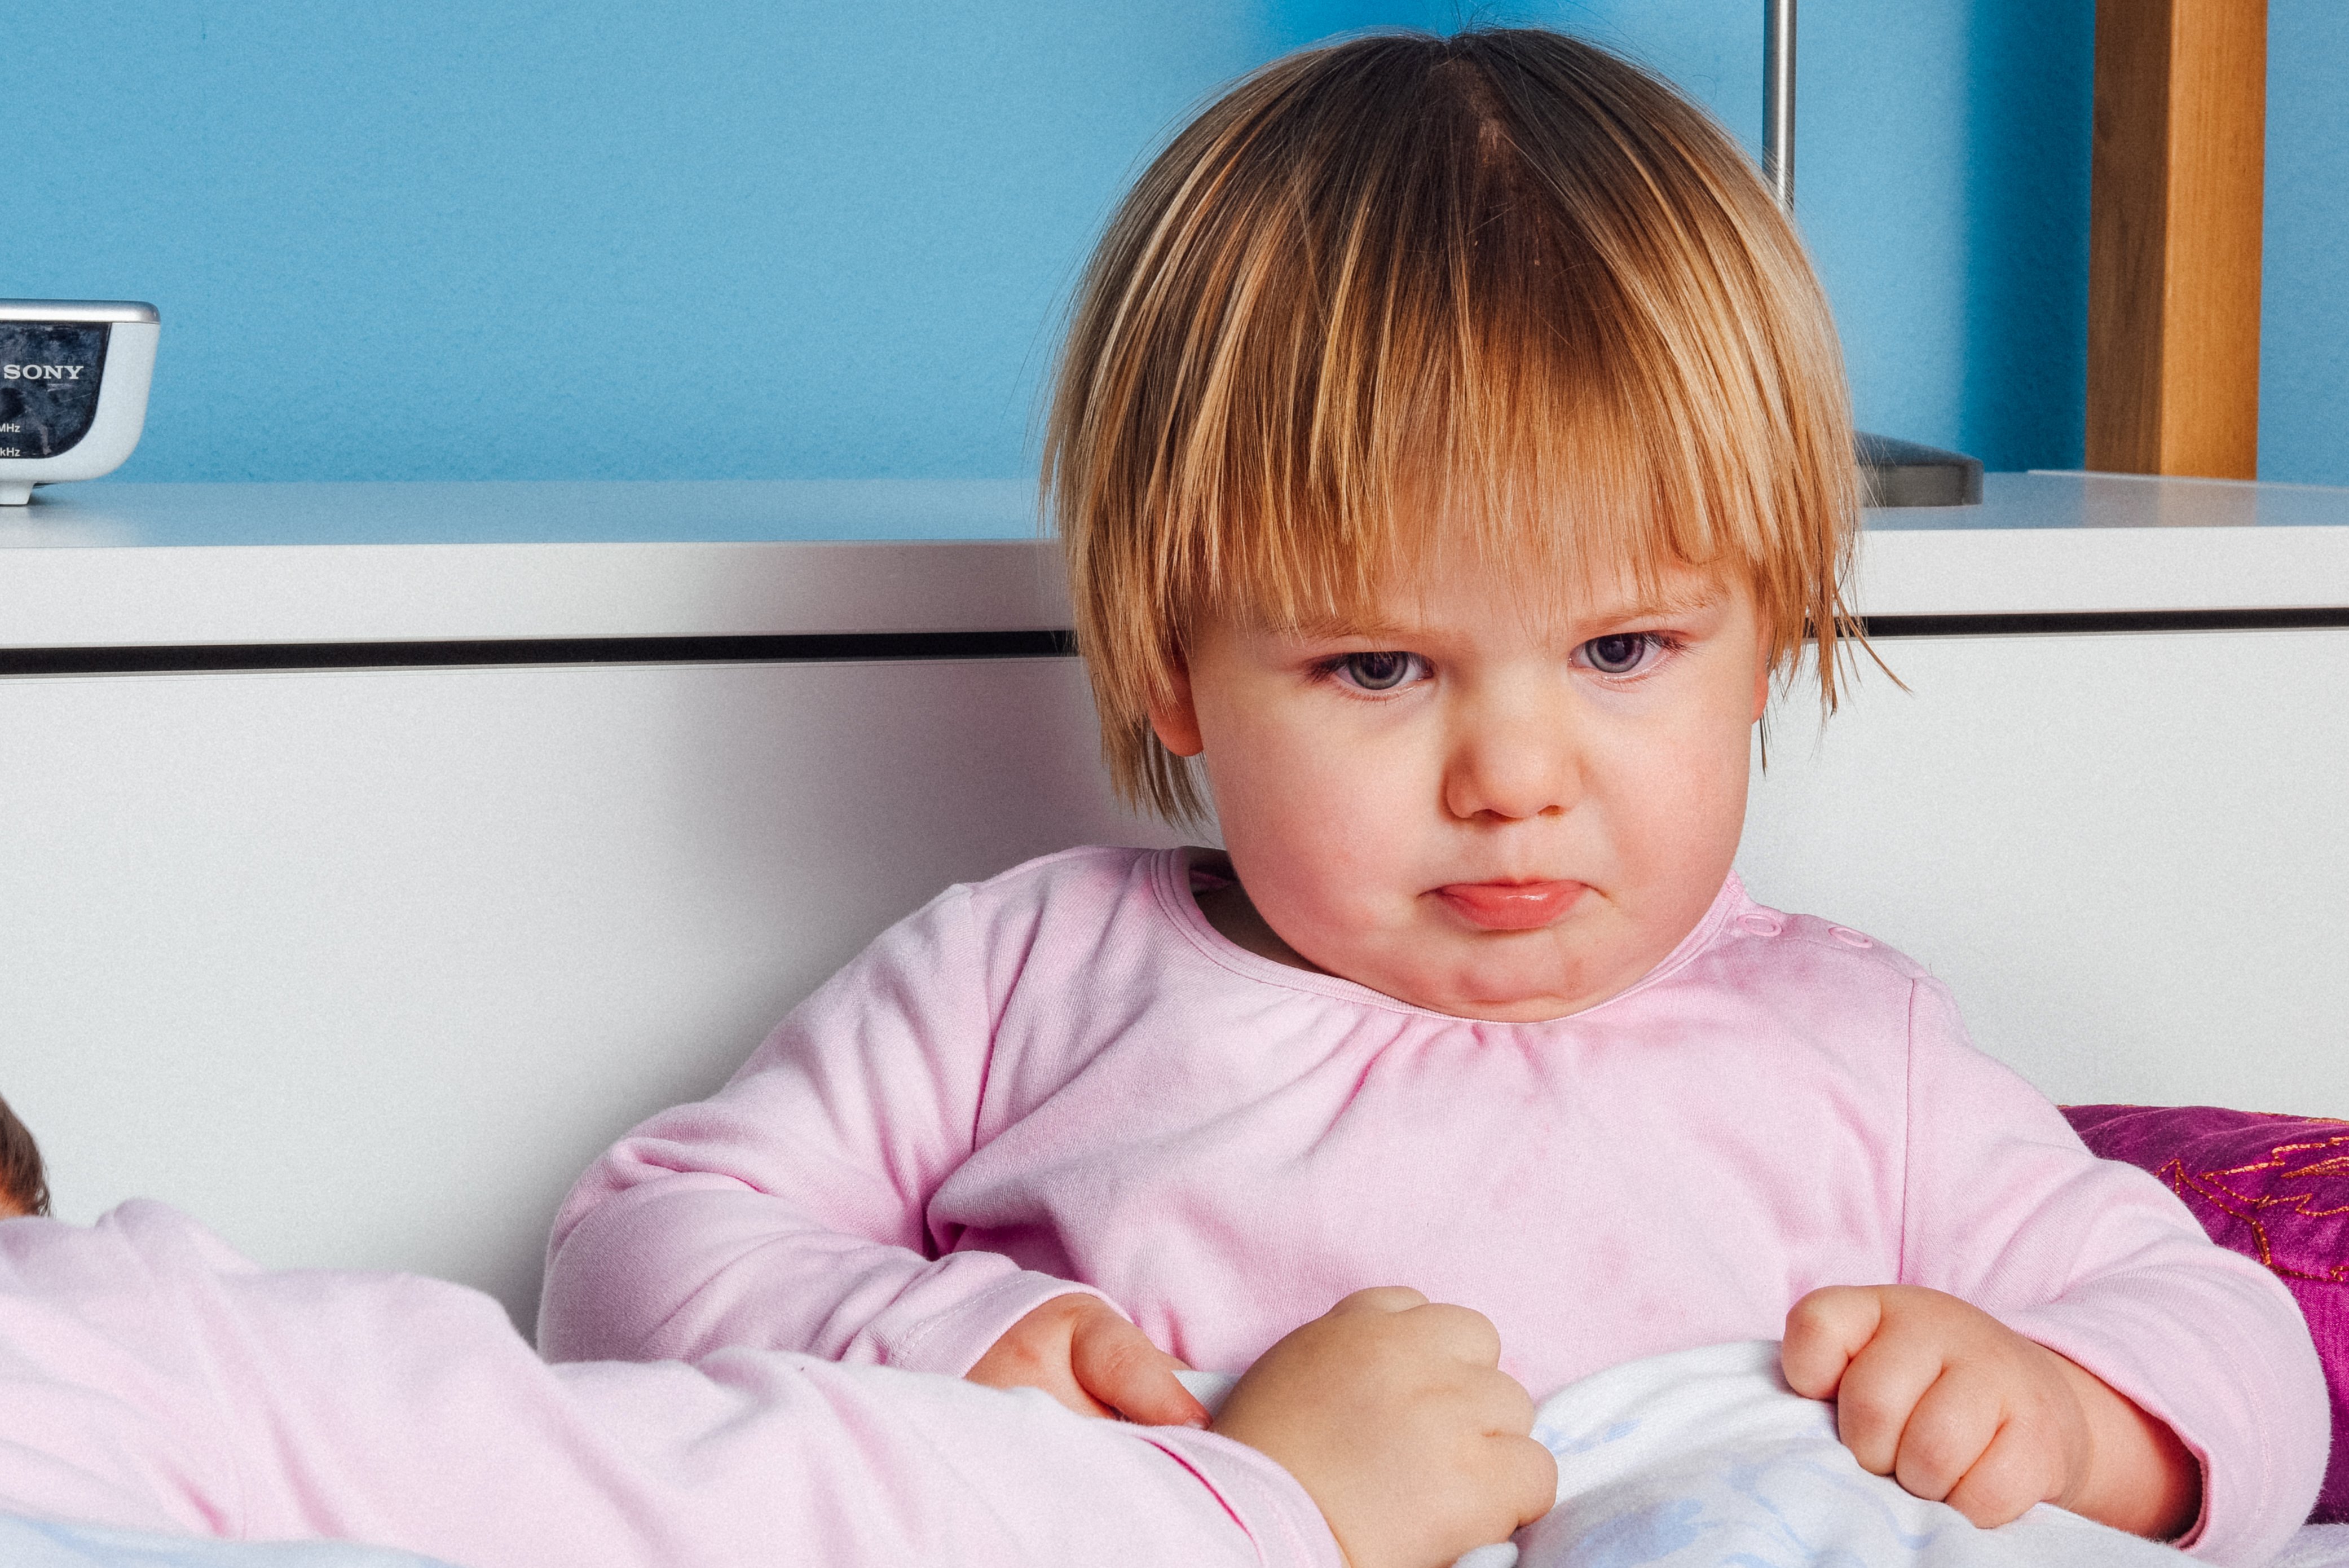 Understanding Emotions is important for toddlers and pre-schoolers